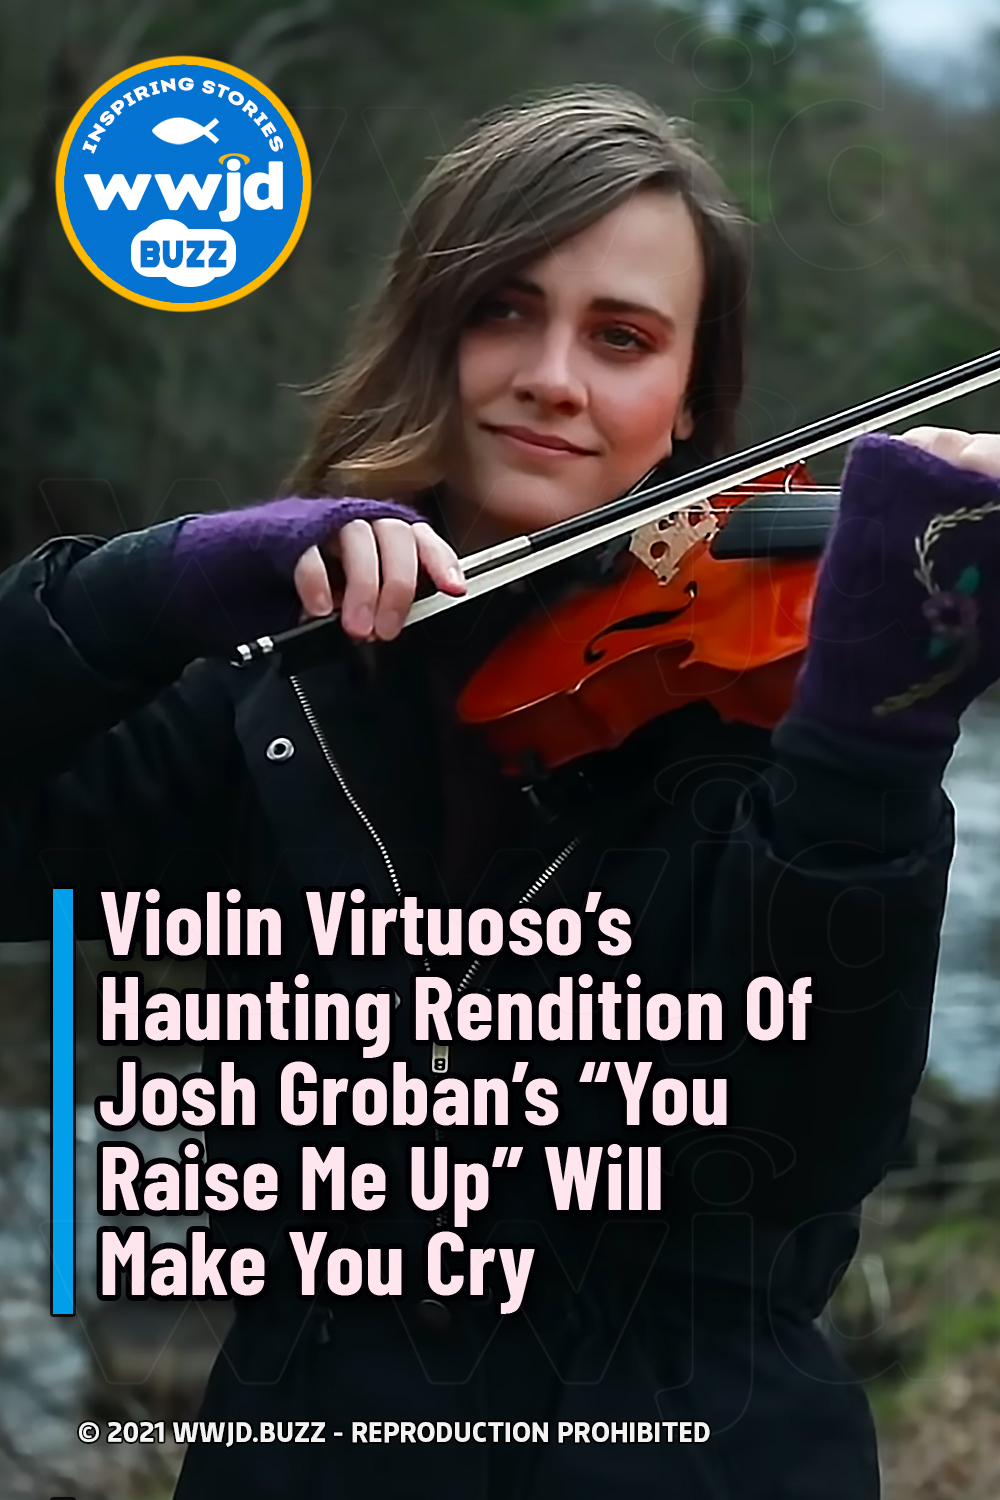 Violin Virtuoso’s Haunting Rendition Of Josh Groban’s “You Raise Me Up” Will Make You Cry